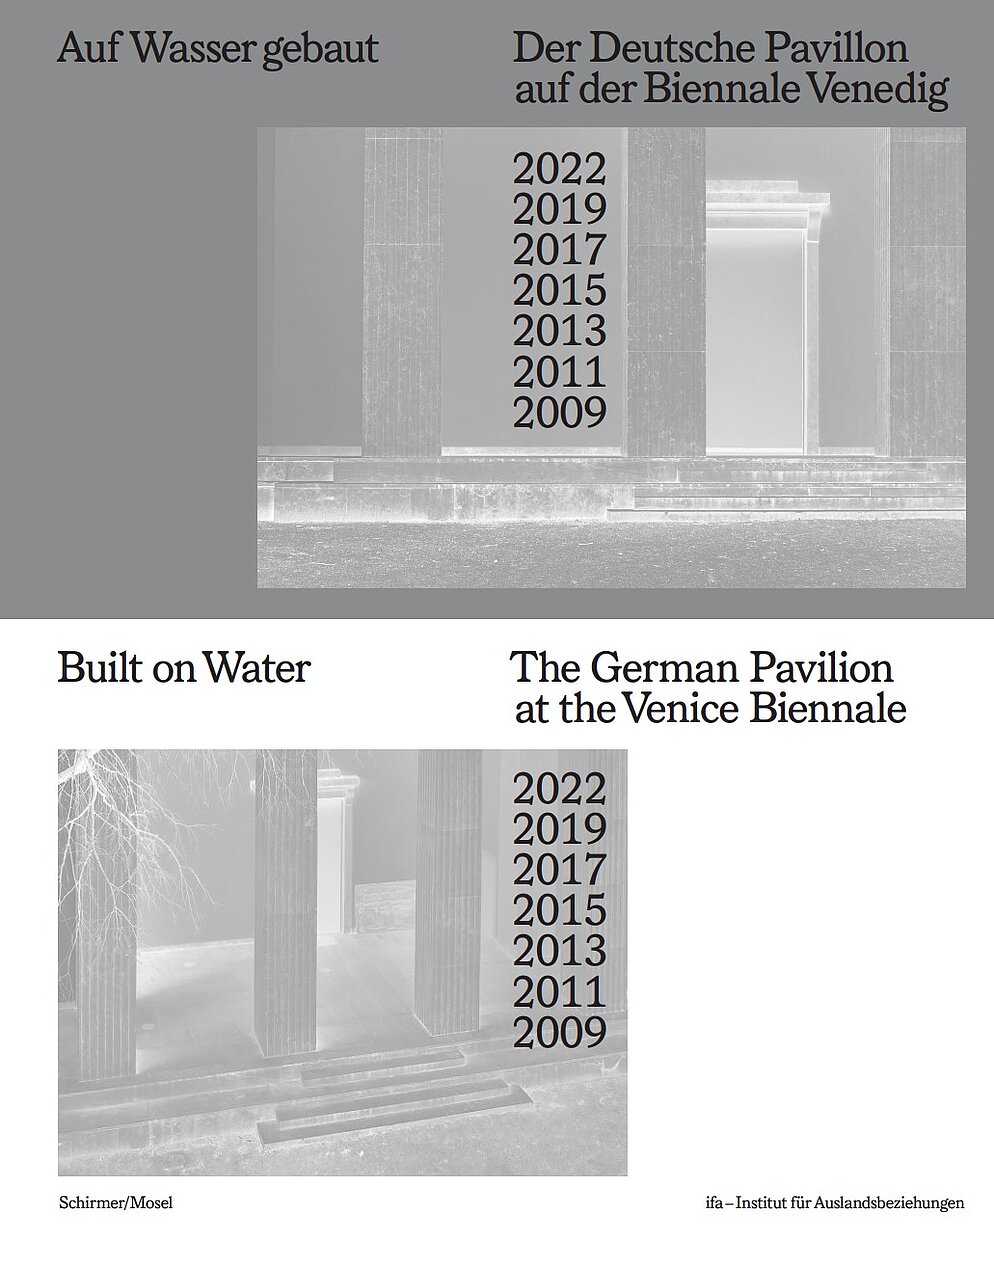 A book cover with the title "Built on Water. The German Pavilion at the Venice Biennale. 2022, 2019, 2017, 2015, 2013, 2011, 2009" is displayed. In the left lower corner it reads the name of the publisher Schirmer and Mosel, in the right corner the name of the editor ifa – Institut für Auslandsbeziehungen. On the upper half the German title of the book says "Auf Wasser gebaut. Der Deutsche Pavilion auf der Biennale Venedig. 2022, 2019, 2017, 2015, 2013, 2011, 2009. © ifa